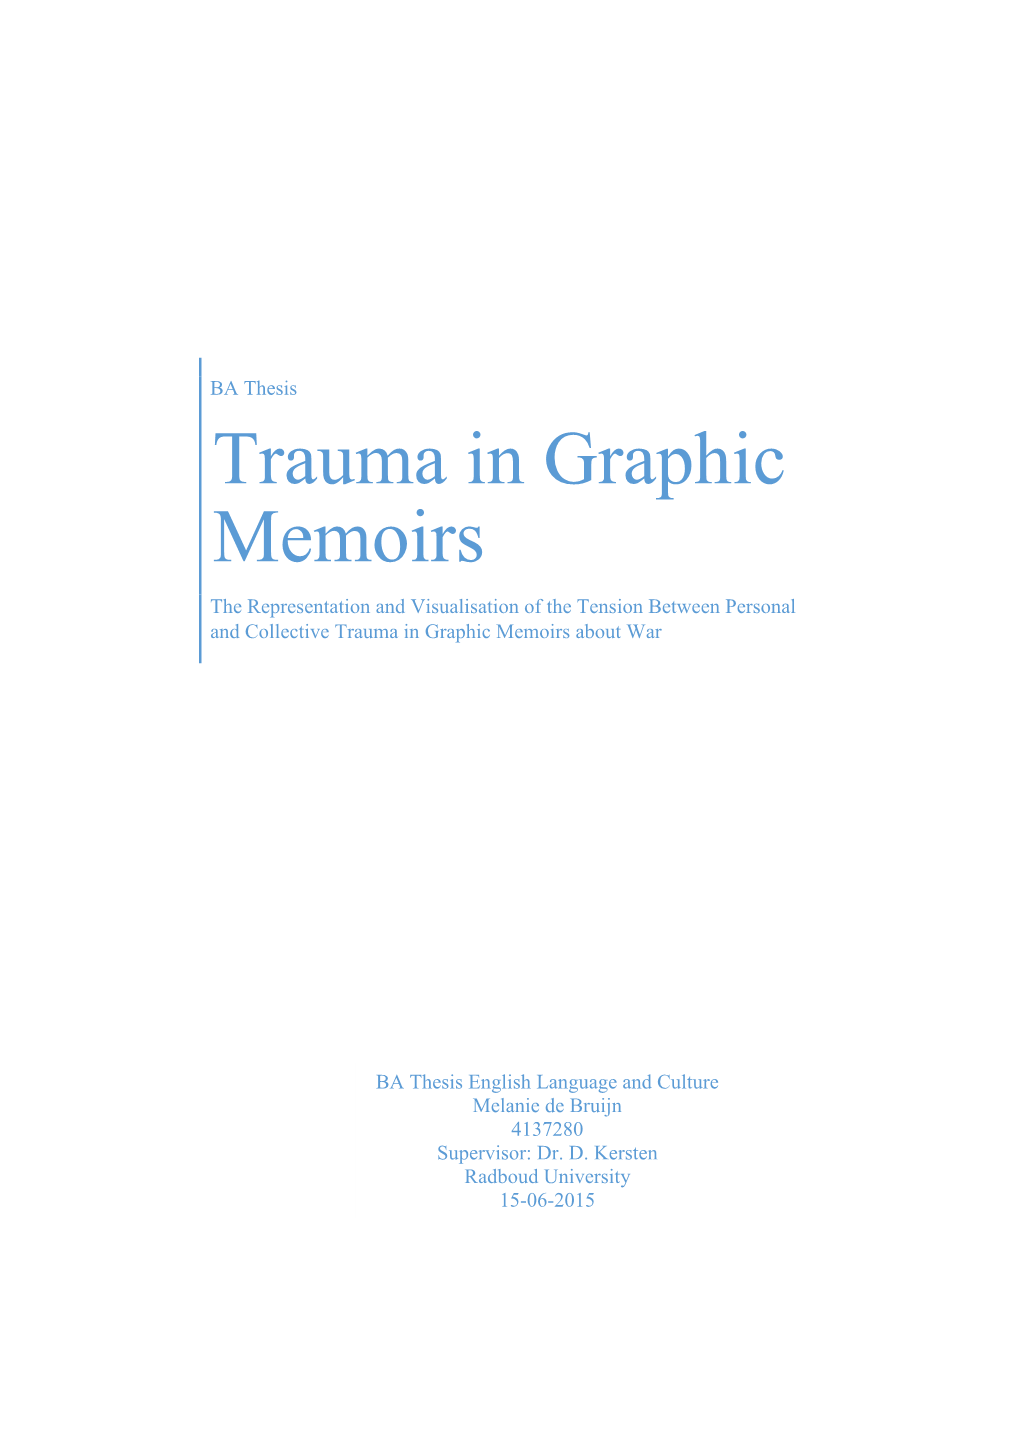 Trauma in Graphic Memoirs the Representation and Visualisation of the Tension Between Personal and Collective Trauma in Graphic Memoirs About War